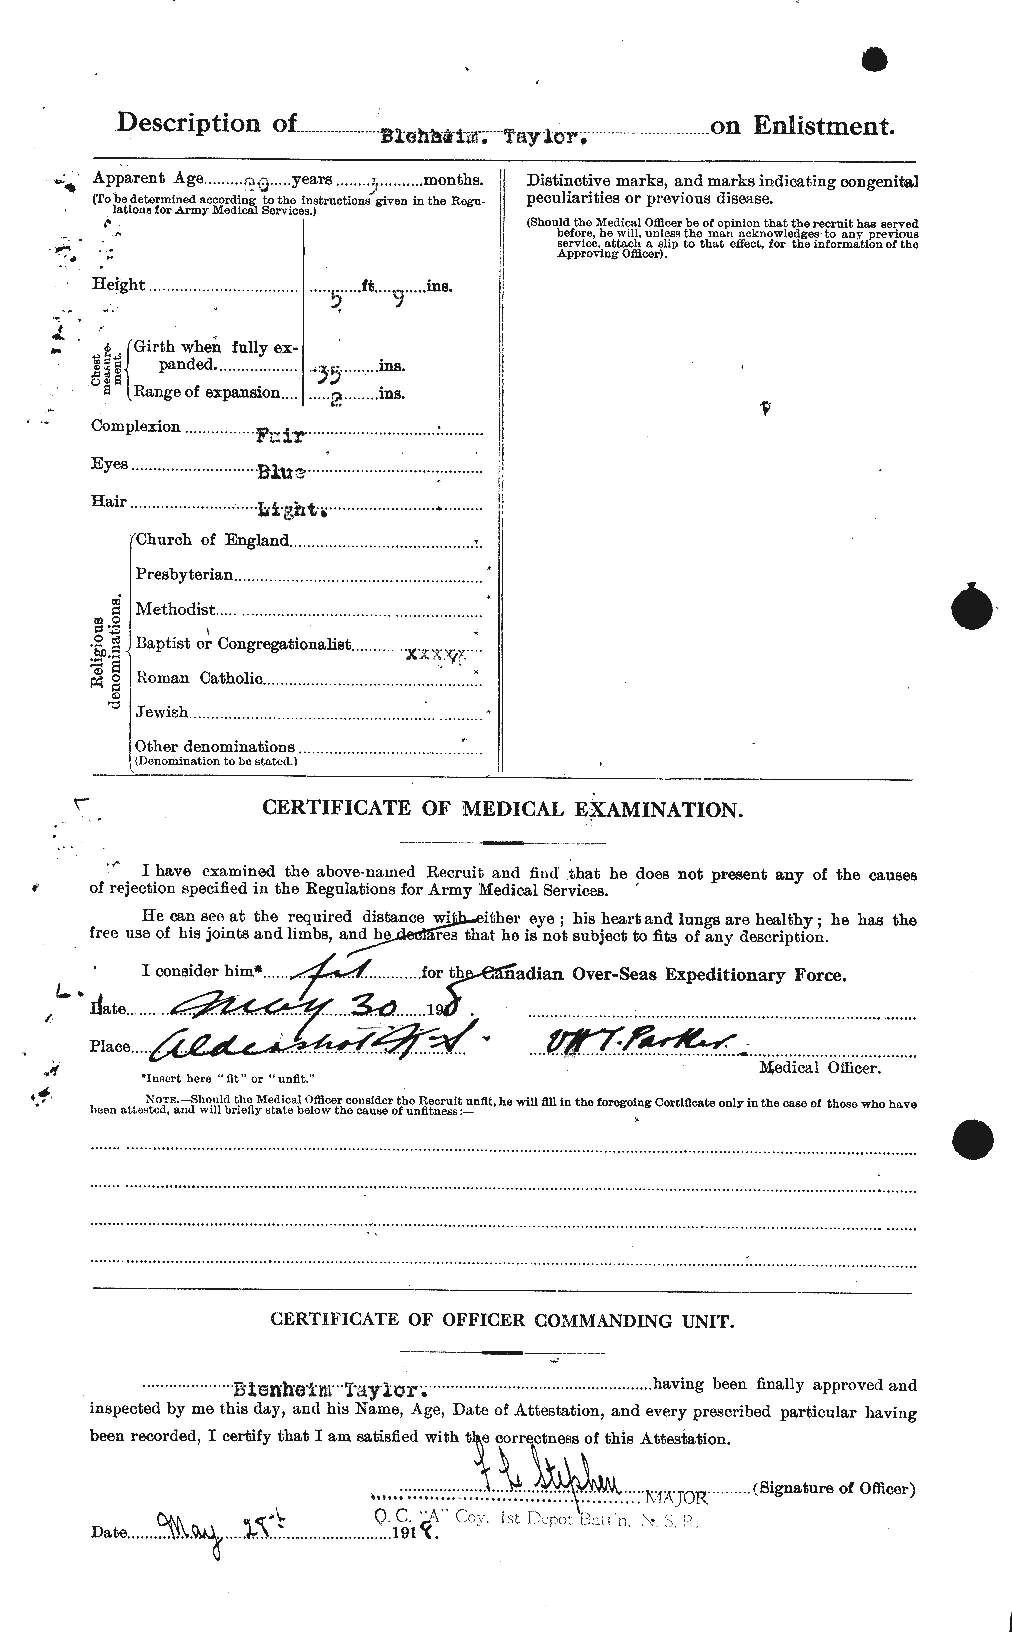 Personnel Records of the First World War - CEF 626776b